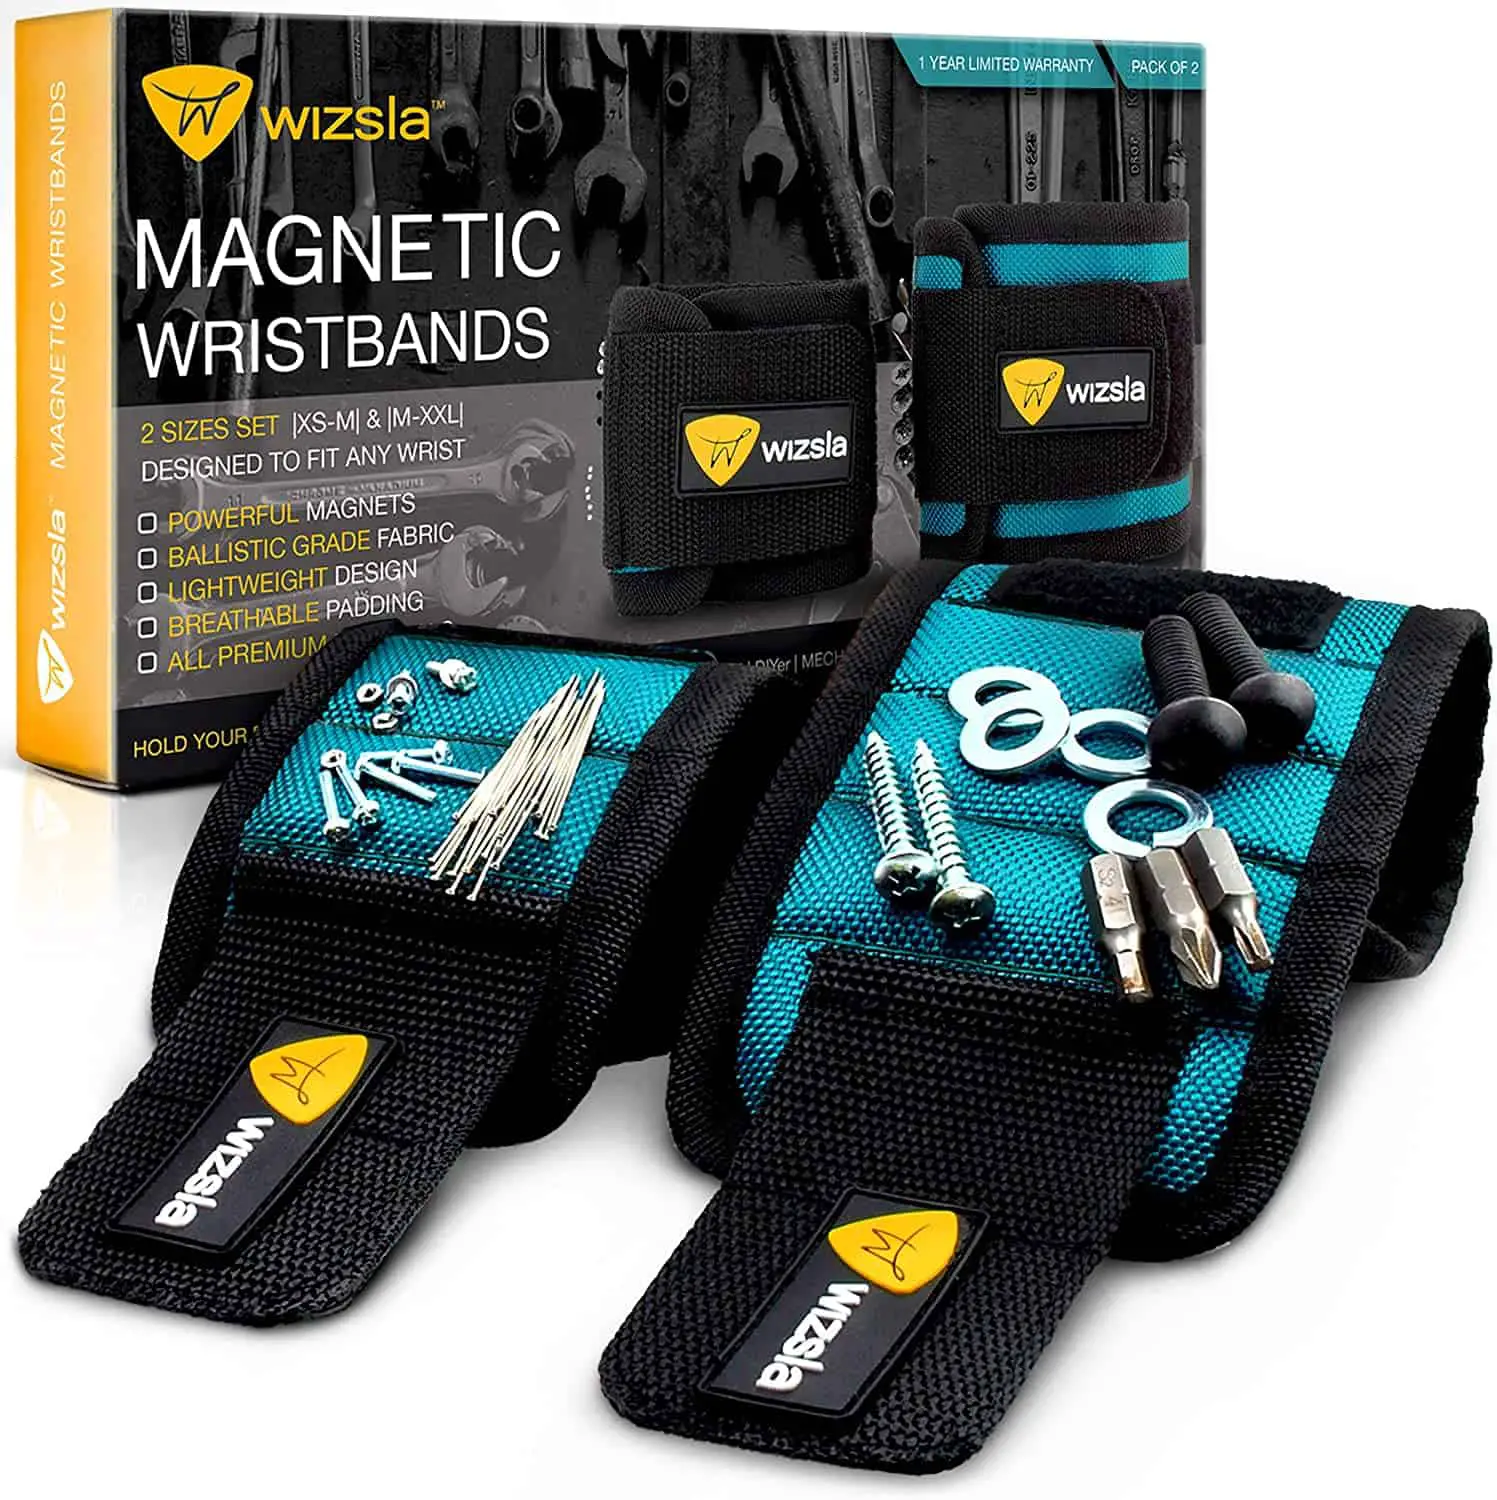 Best magnetic wristband for home use- Wizsla Set of 2